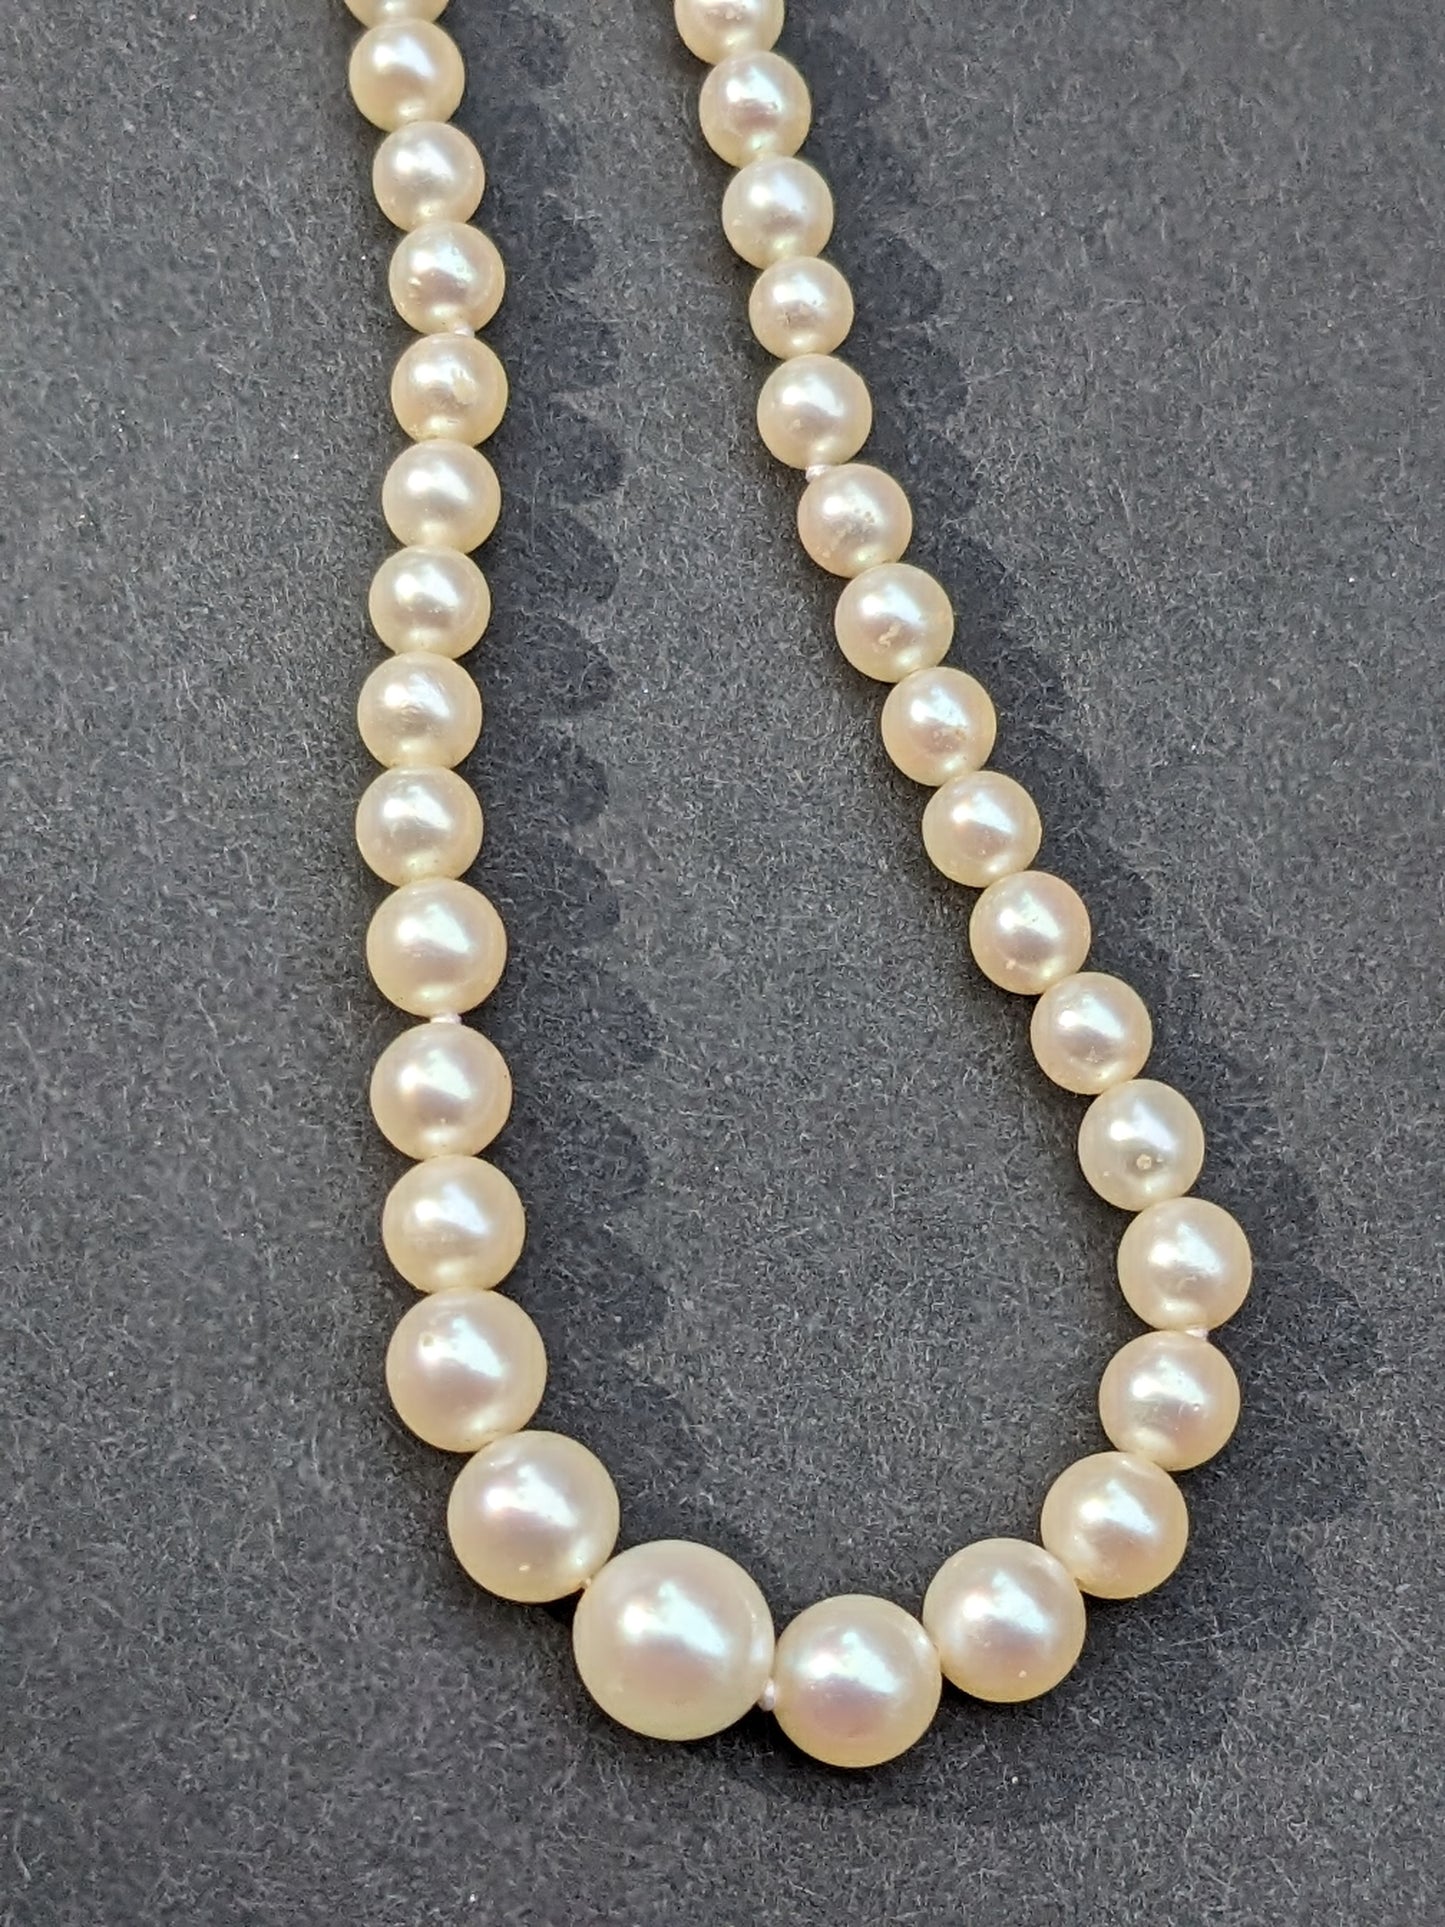 14K Antique Graduated Pearl Necklace with Bow Clasp